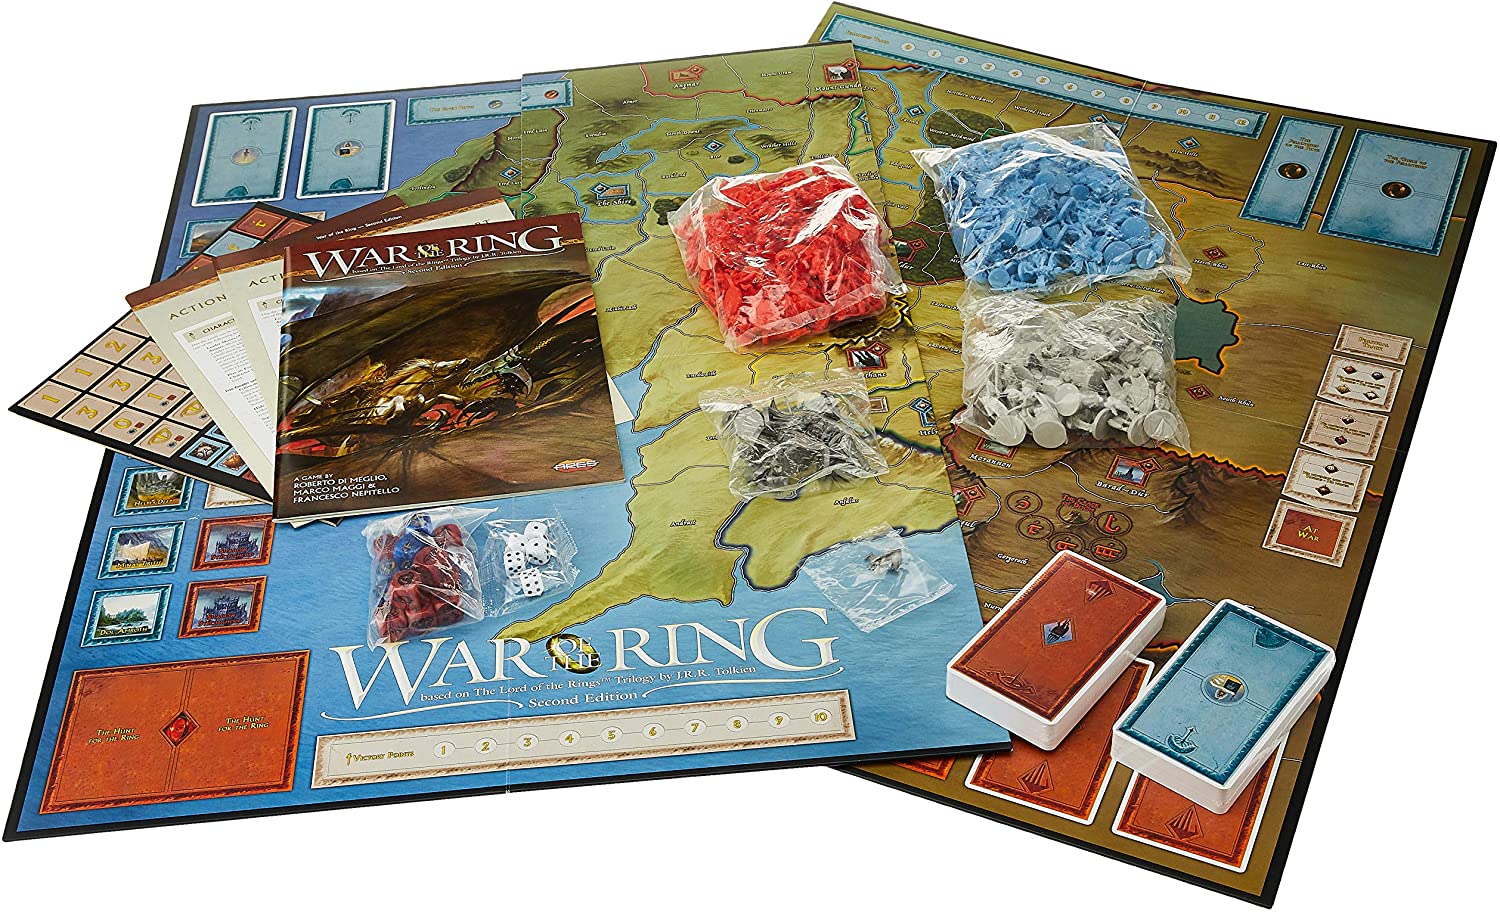 Find out about War of the Ring: Second Edition